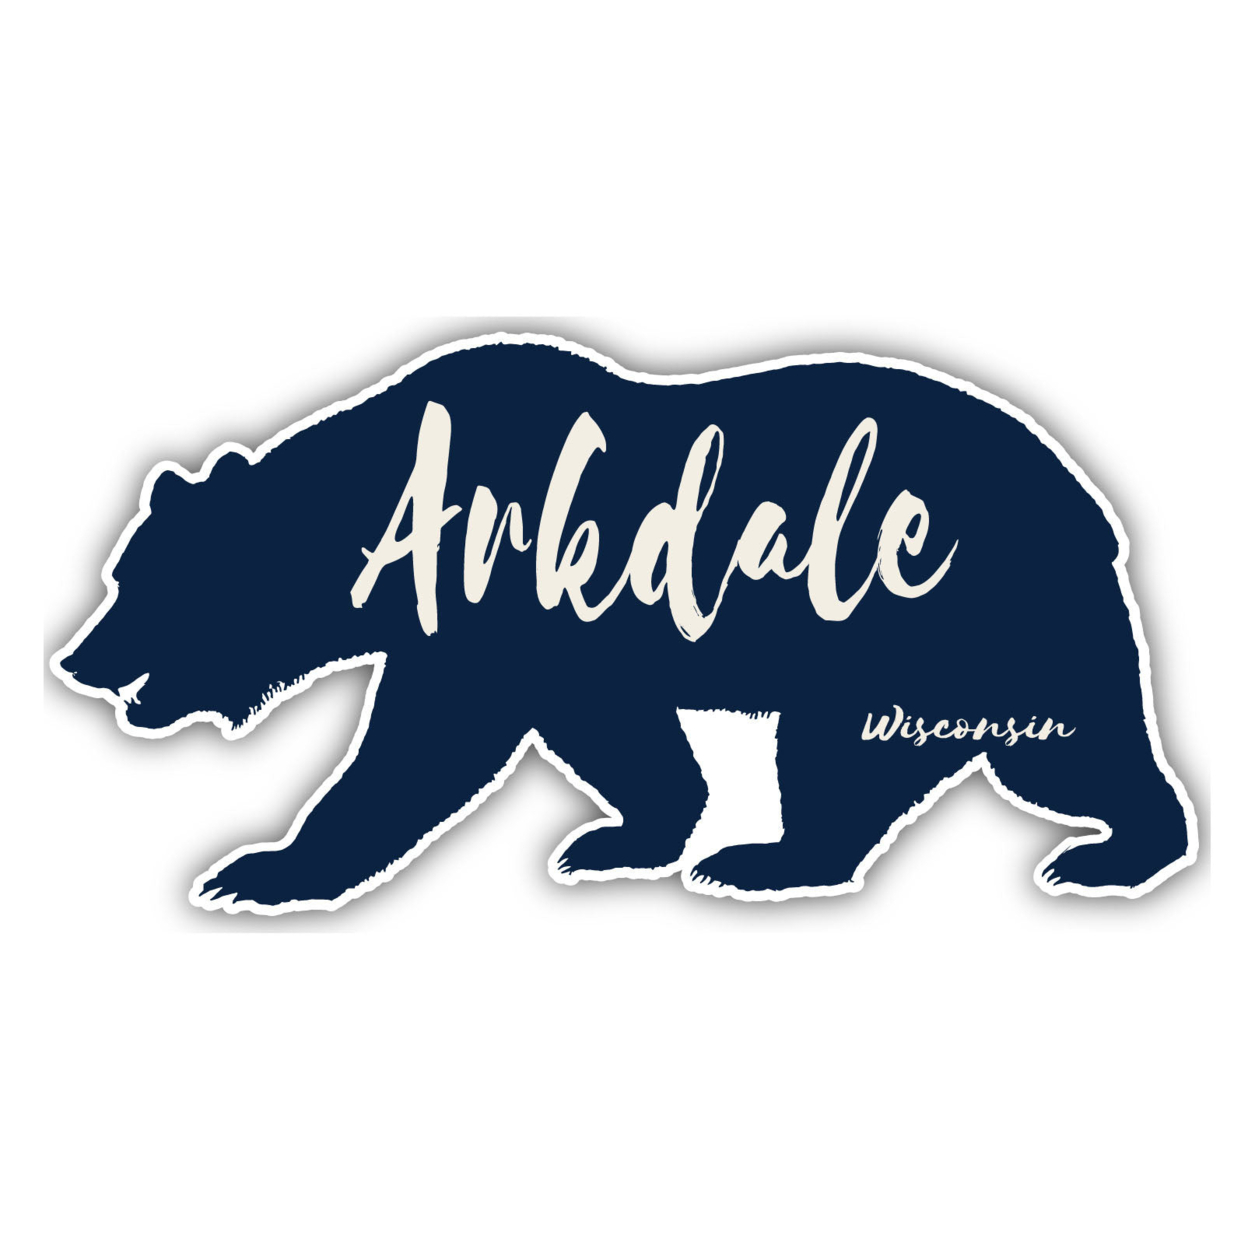 Arkdale Wisconsin Souvenir Decorative Stickers (Choose Theme And Size) - Single Unit, 10-Inch, Adventures Awaits